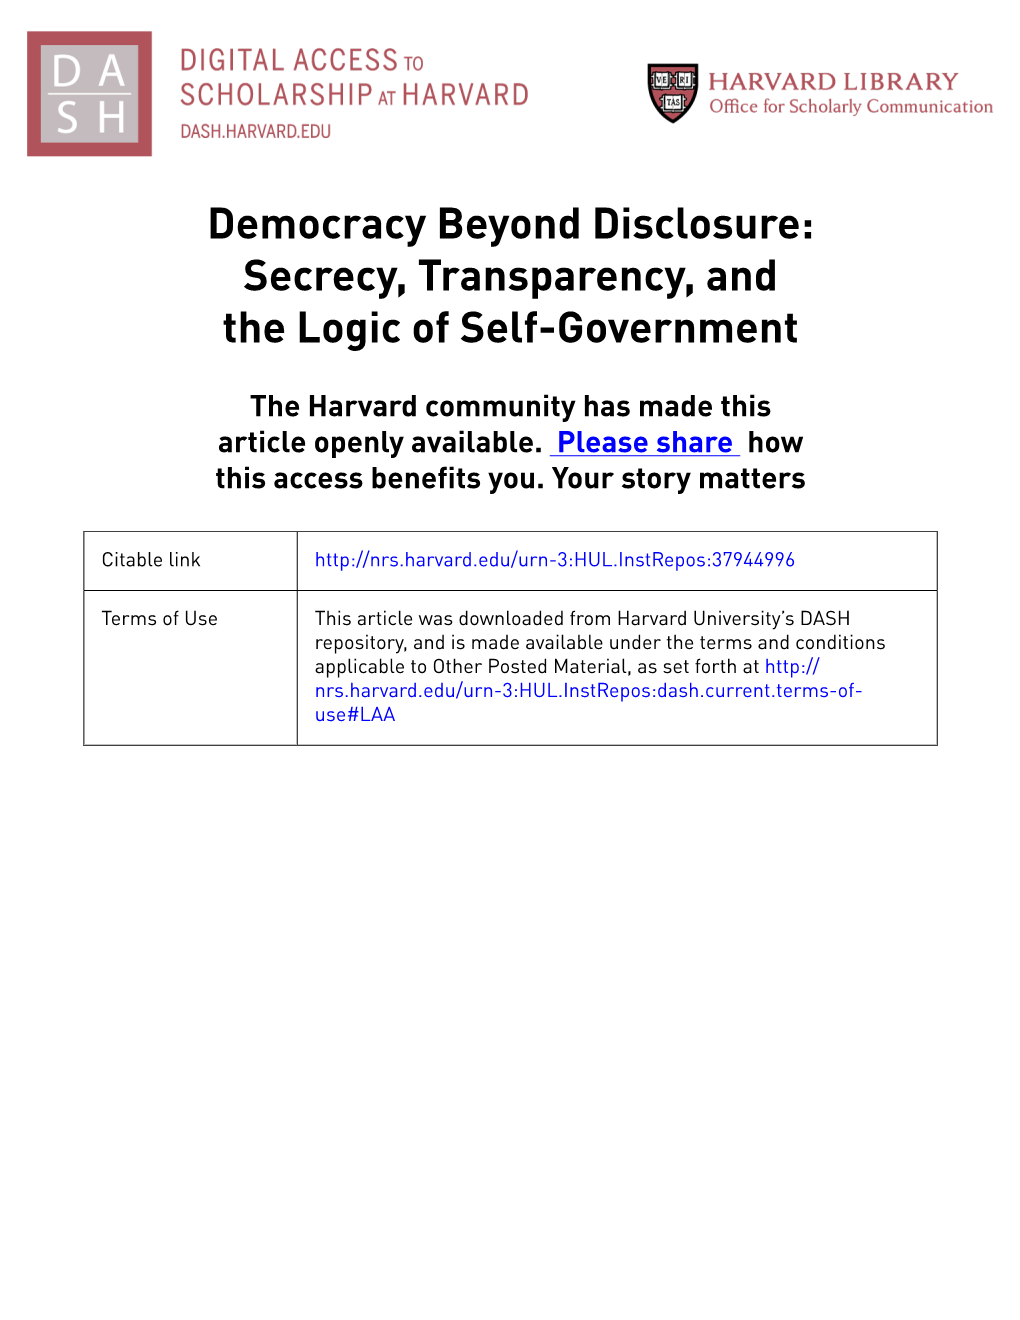 Democracy Beyond Disclosure: Secrecy, Transparency, and the Logic of Self-Government